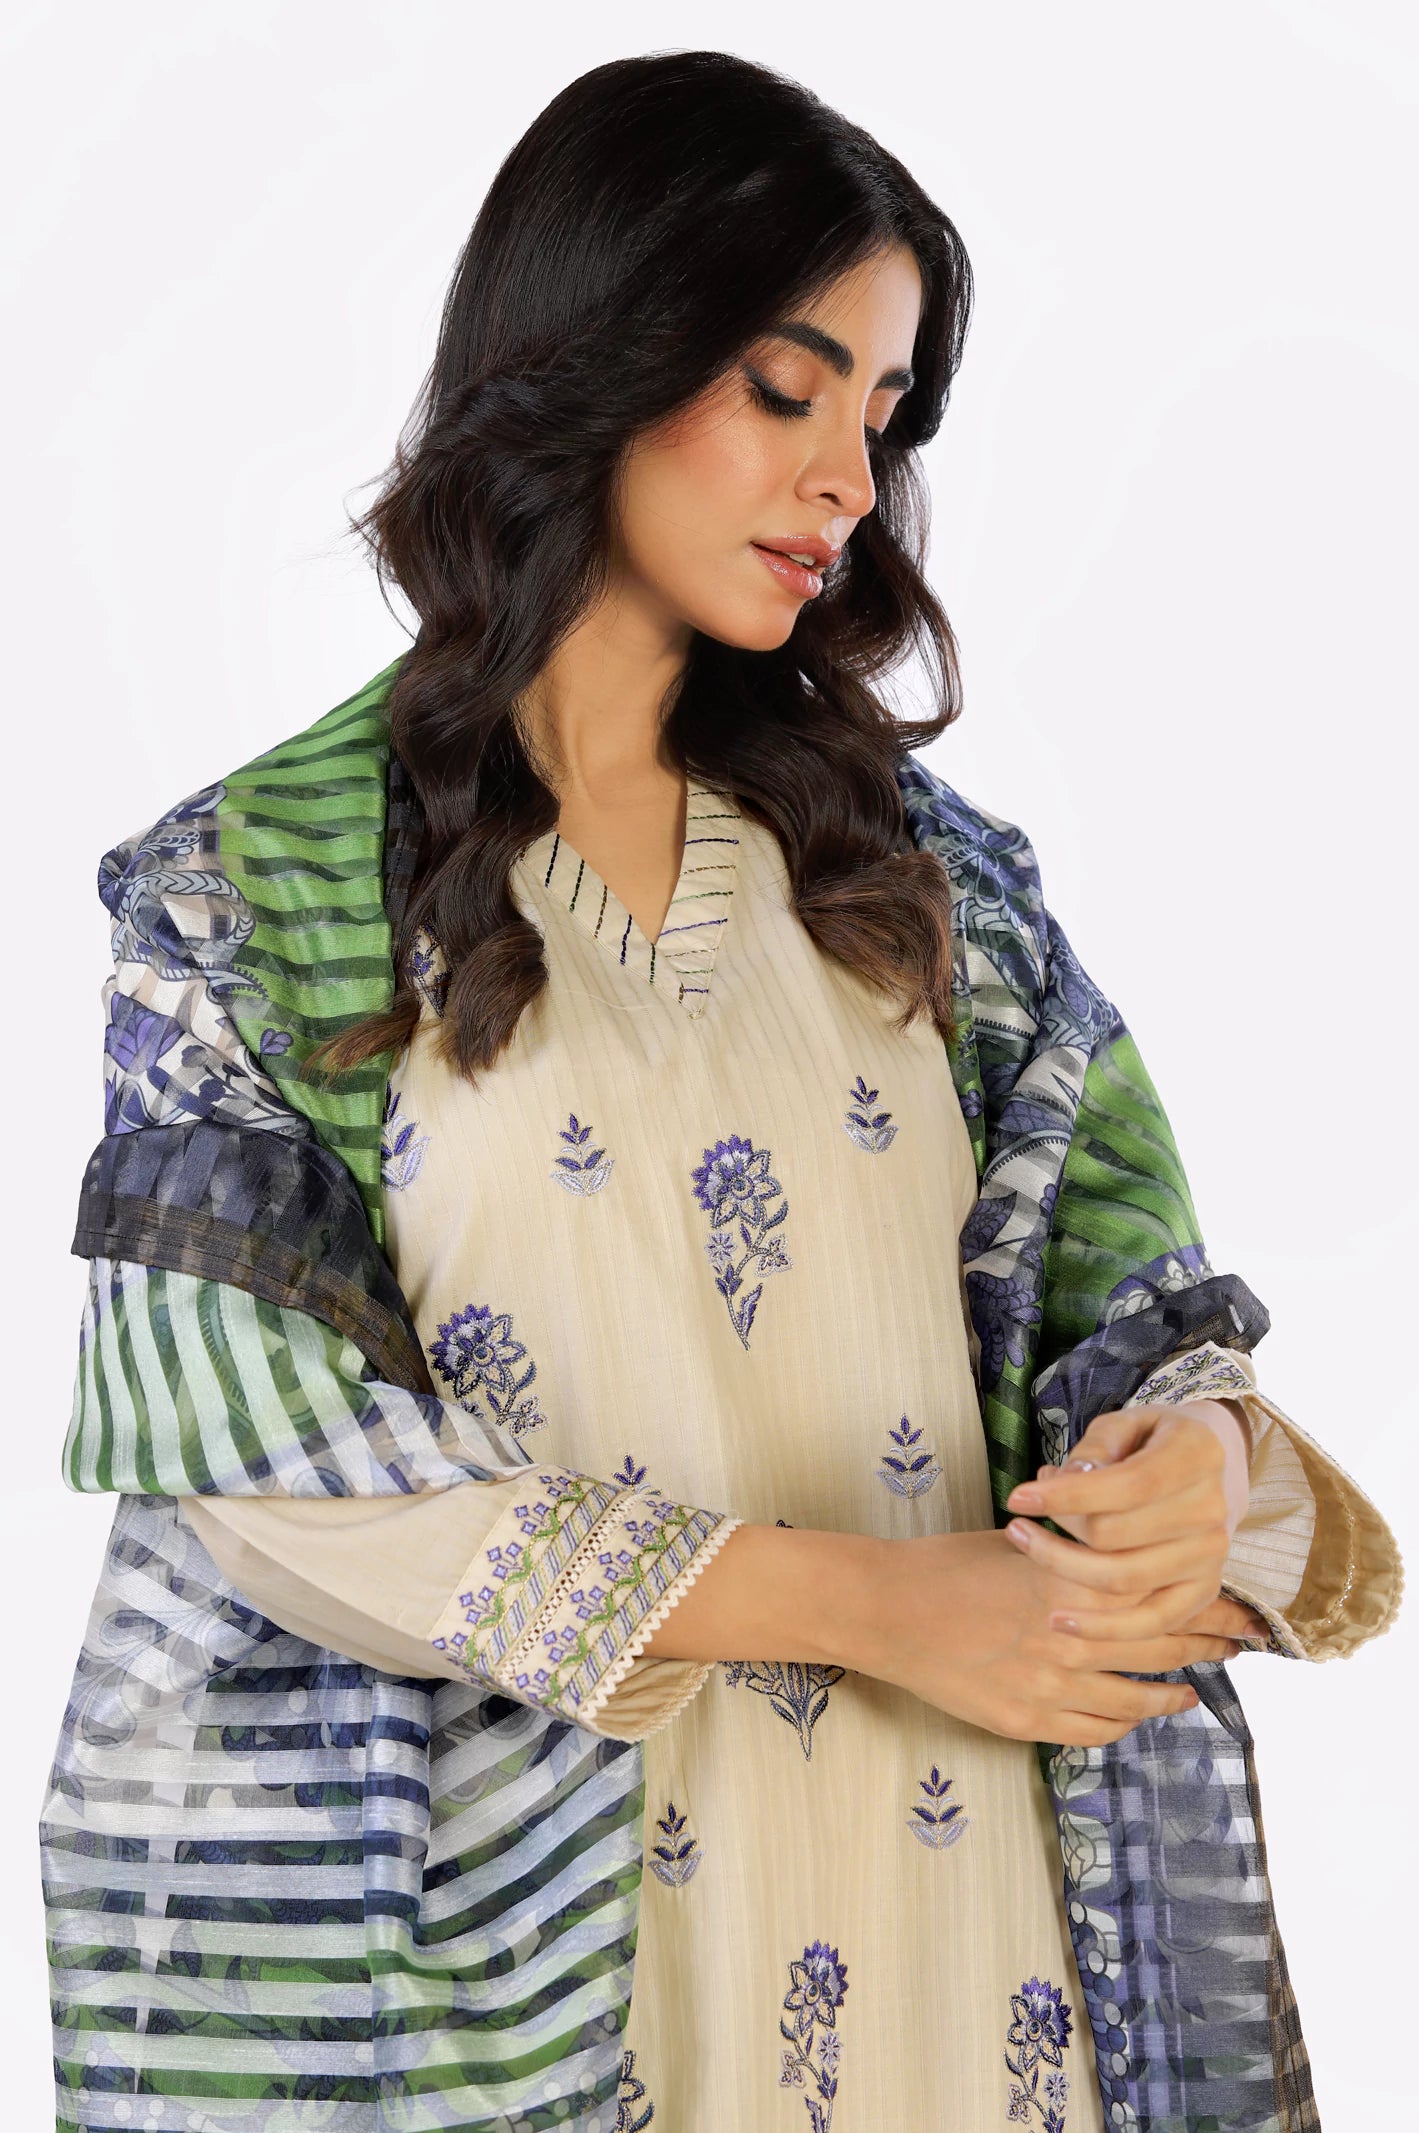 Jacquard Embroidered 3PC Suit From Diners